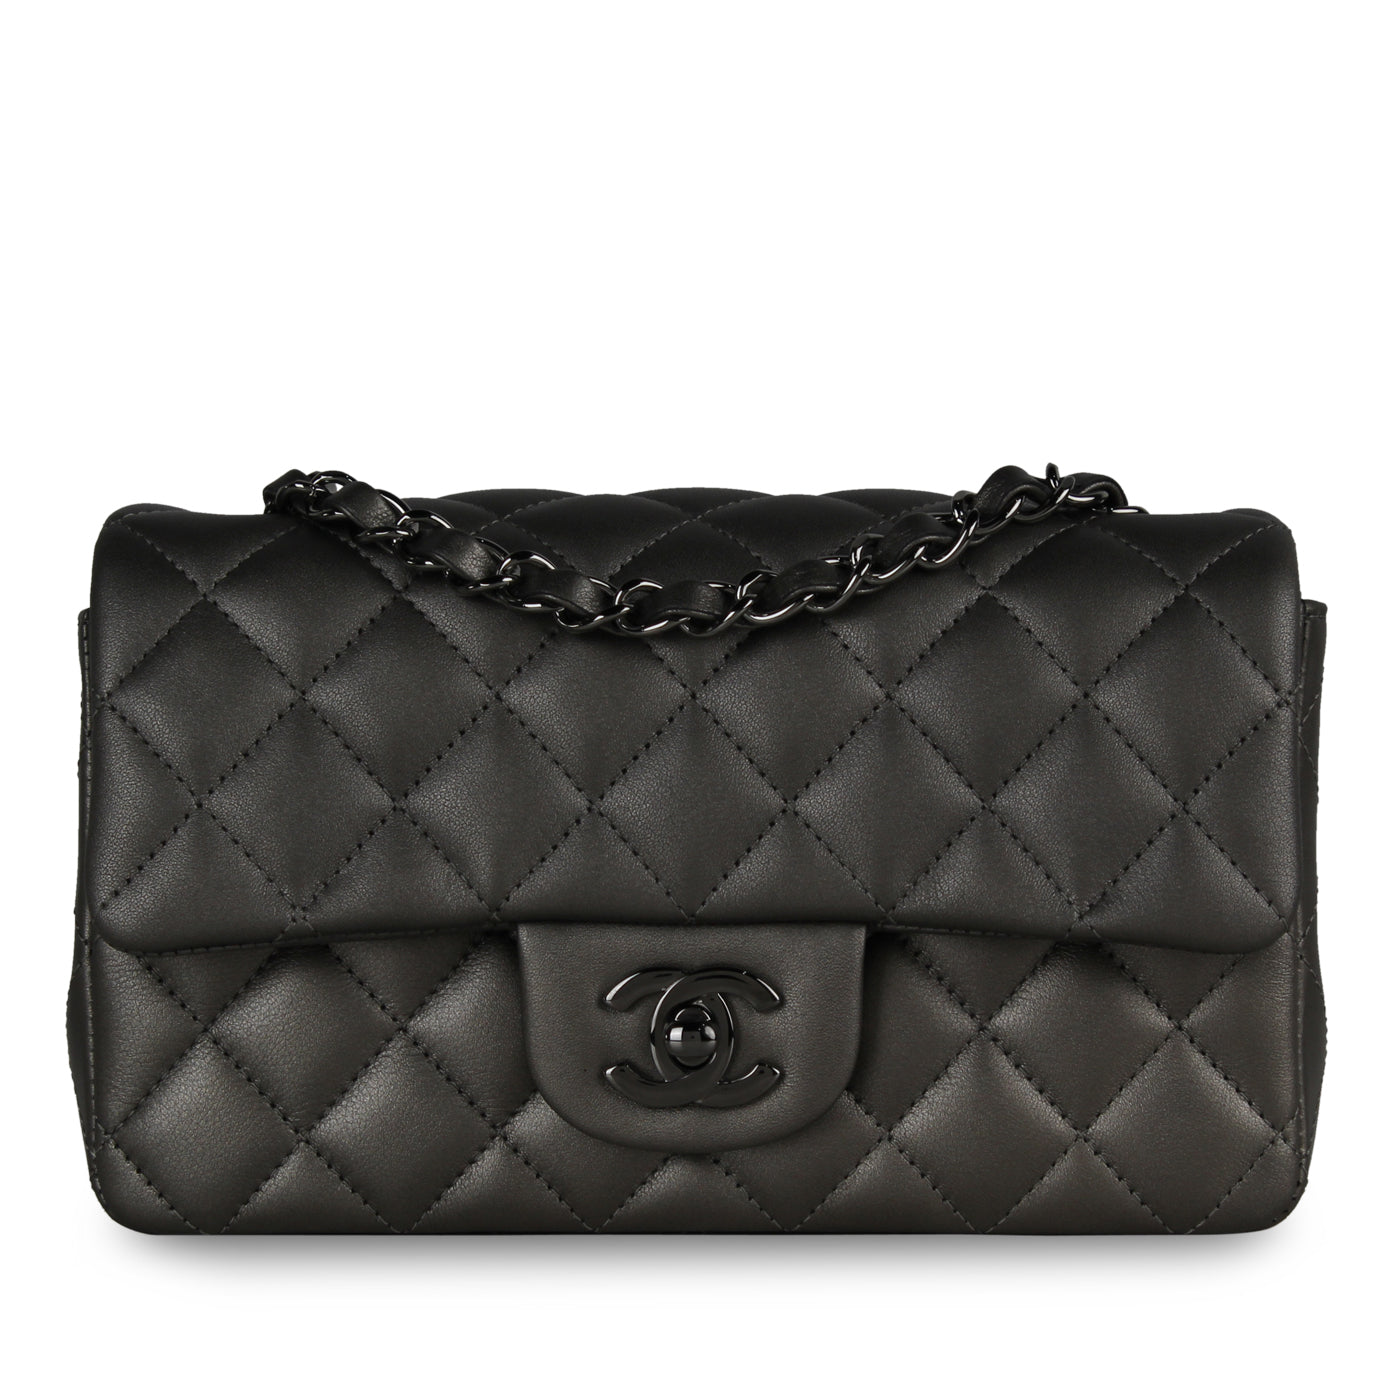 Europe Chanel Bag Price List Reference Guide (2022 Update